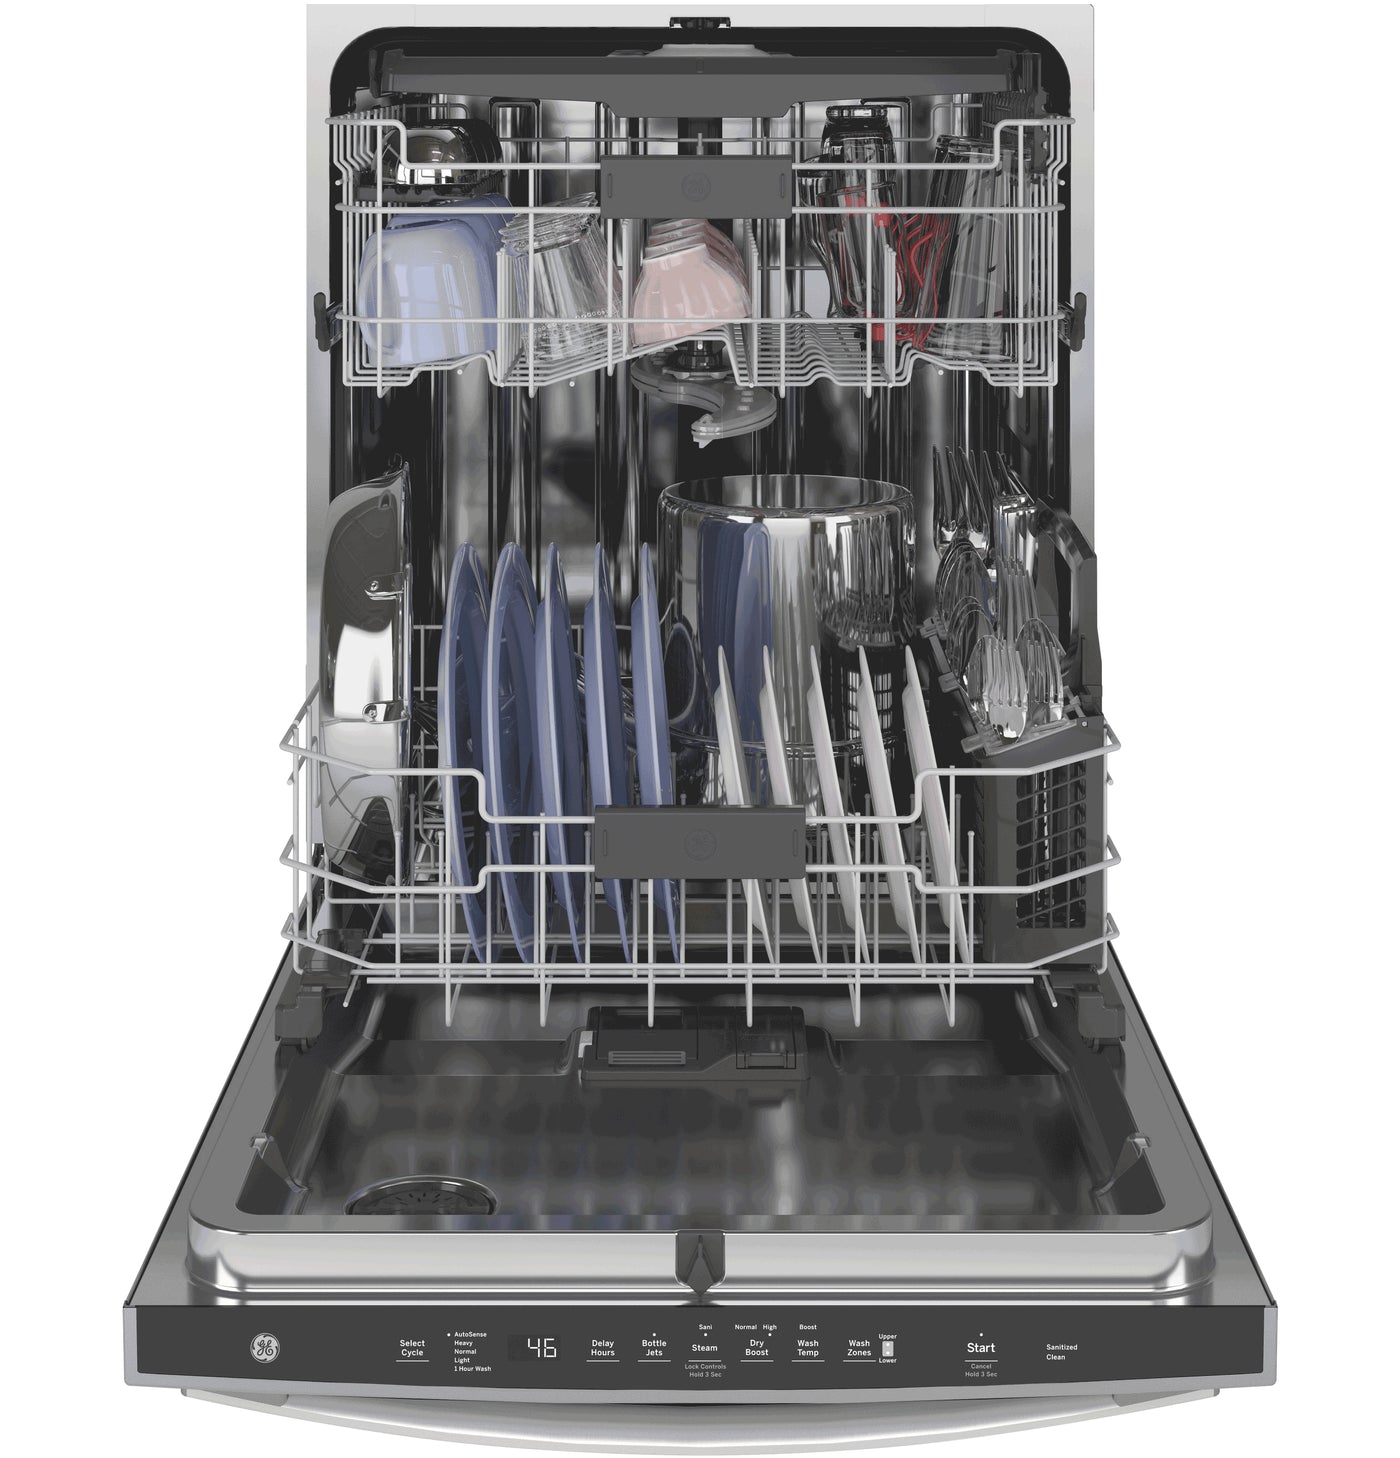 GE Stainless Steel 24" Dishwasher- GDT665SSNSS